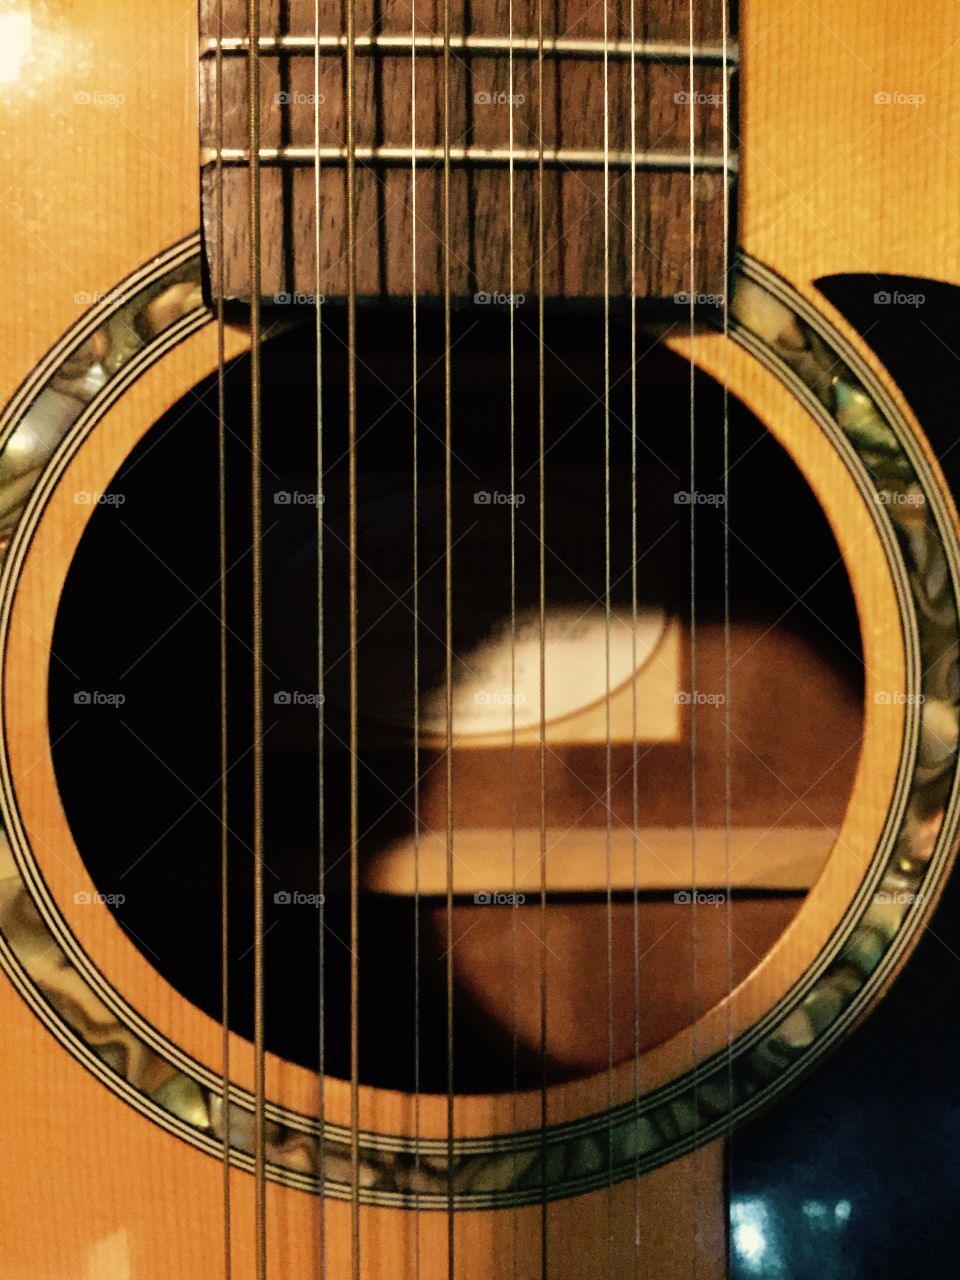 Closeup of a 12 string guitar looking into the hollowed out part..